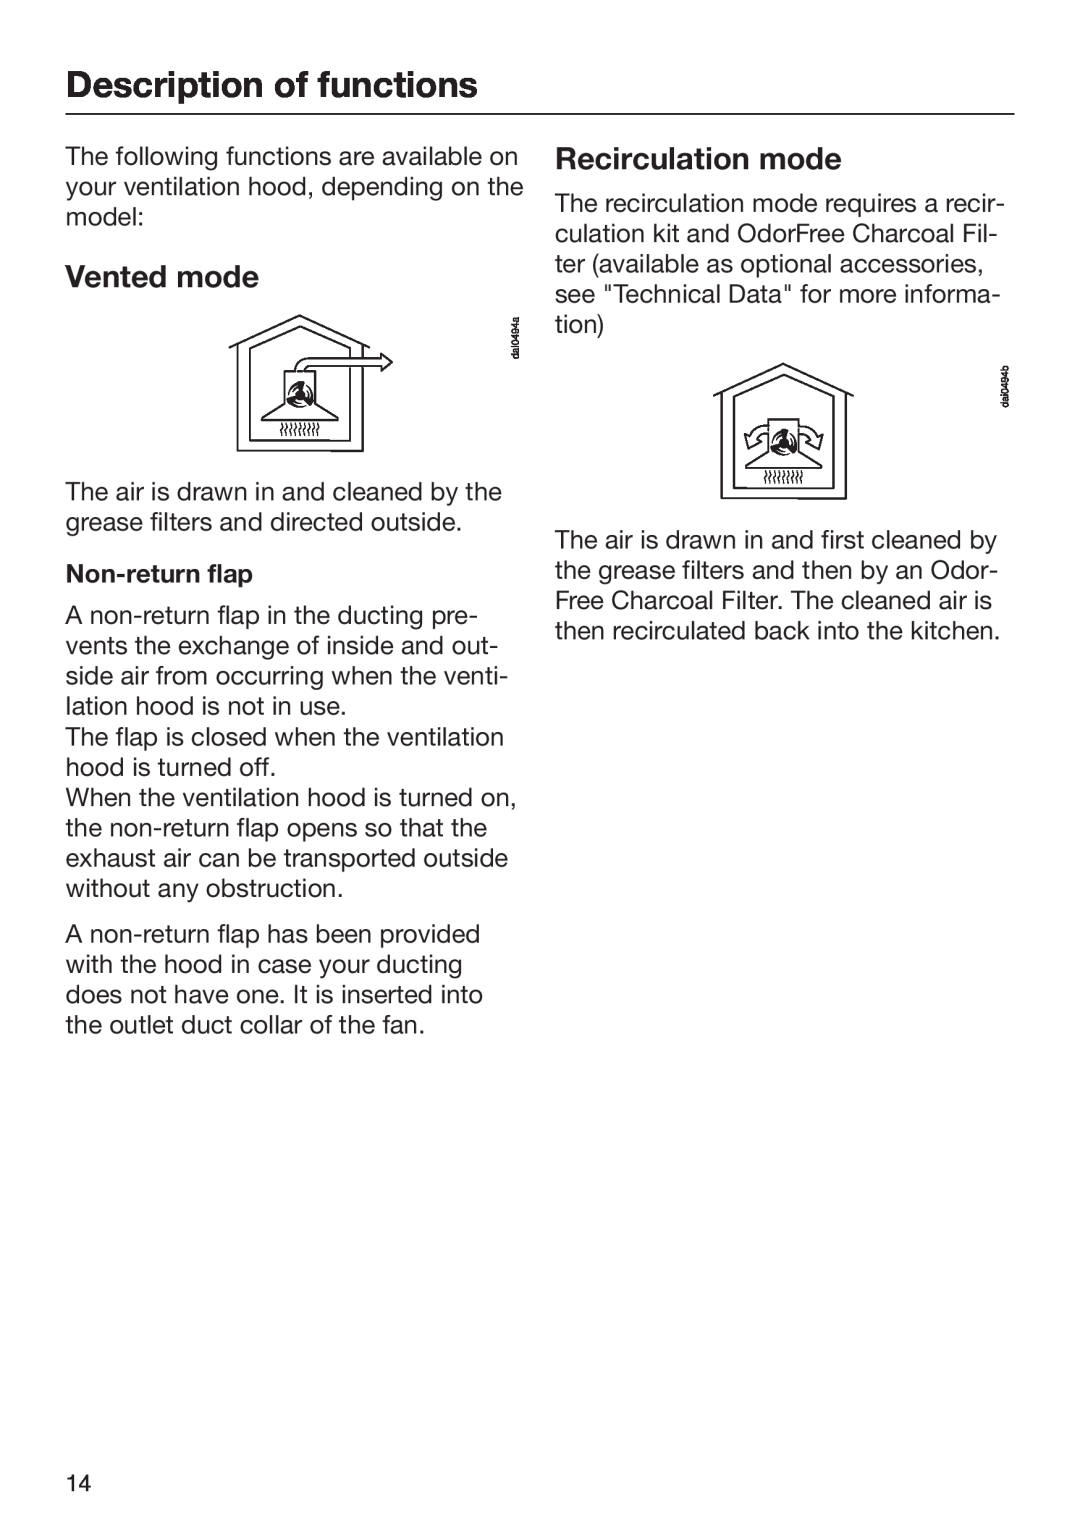 Miele M.-Nr. 09 805 980 installation instructions Description of functions, Vented mode, Recirculation mode, Non-returnflap 